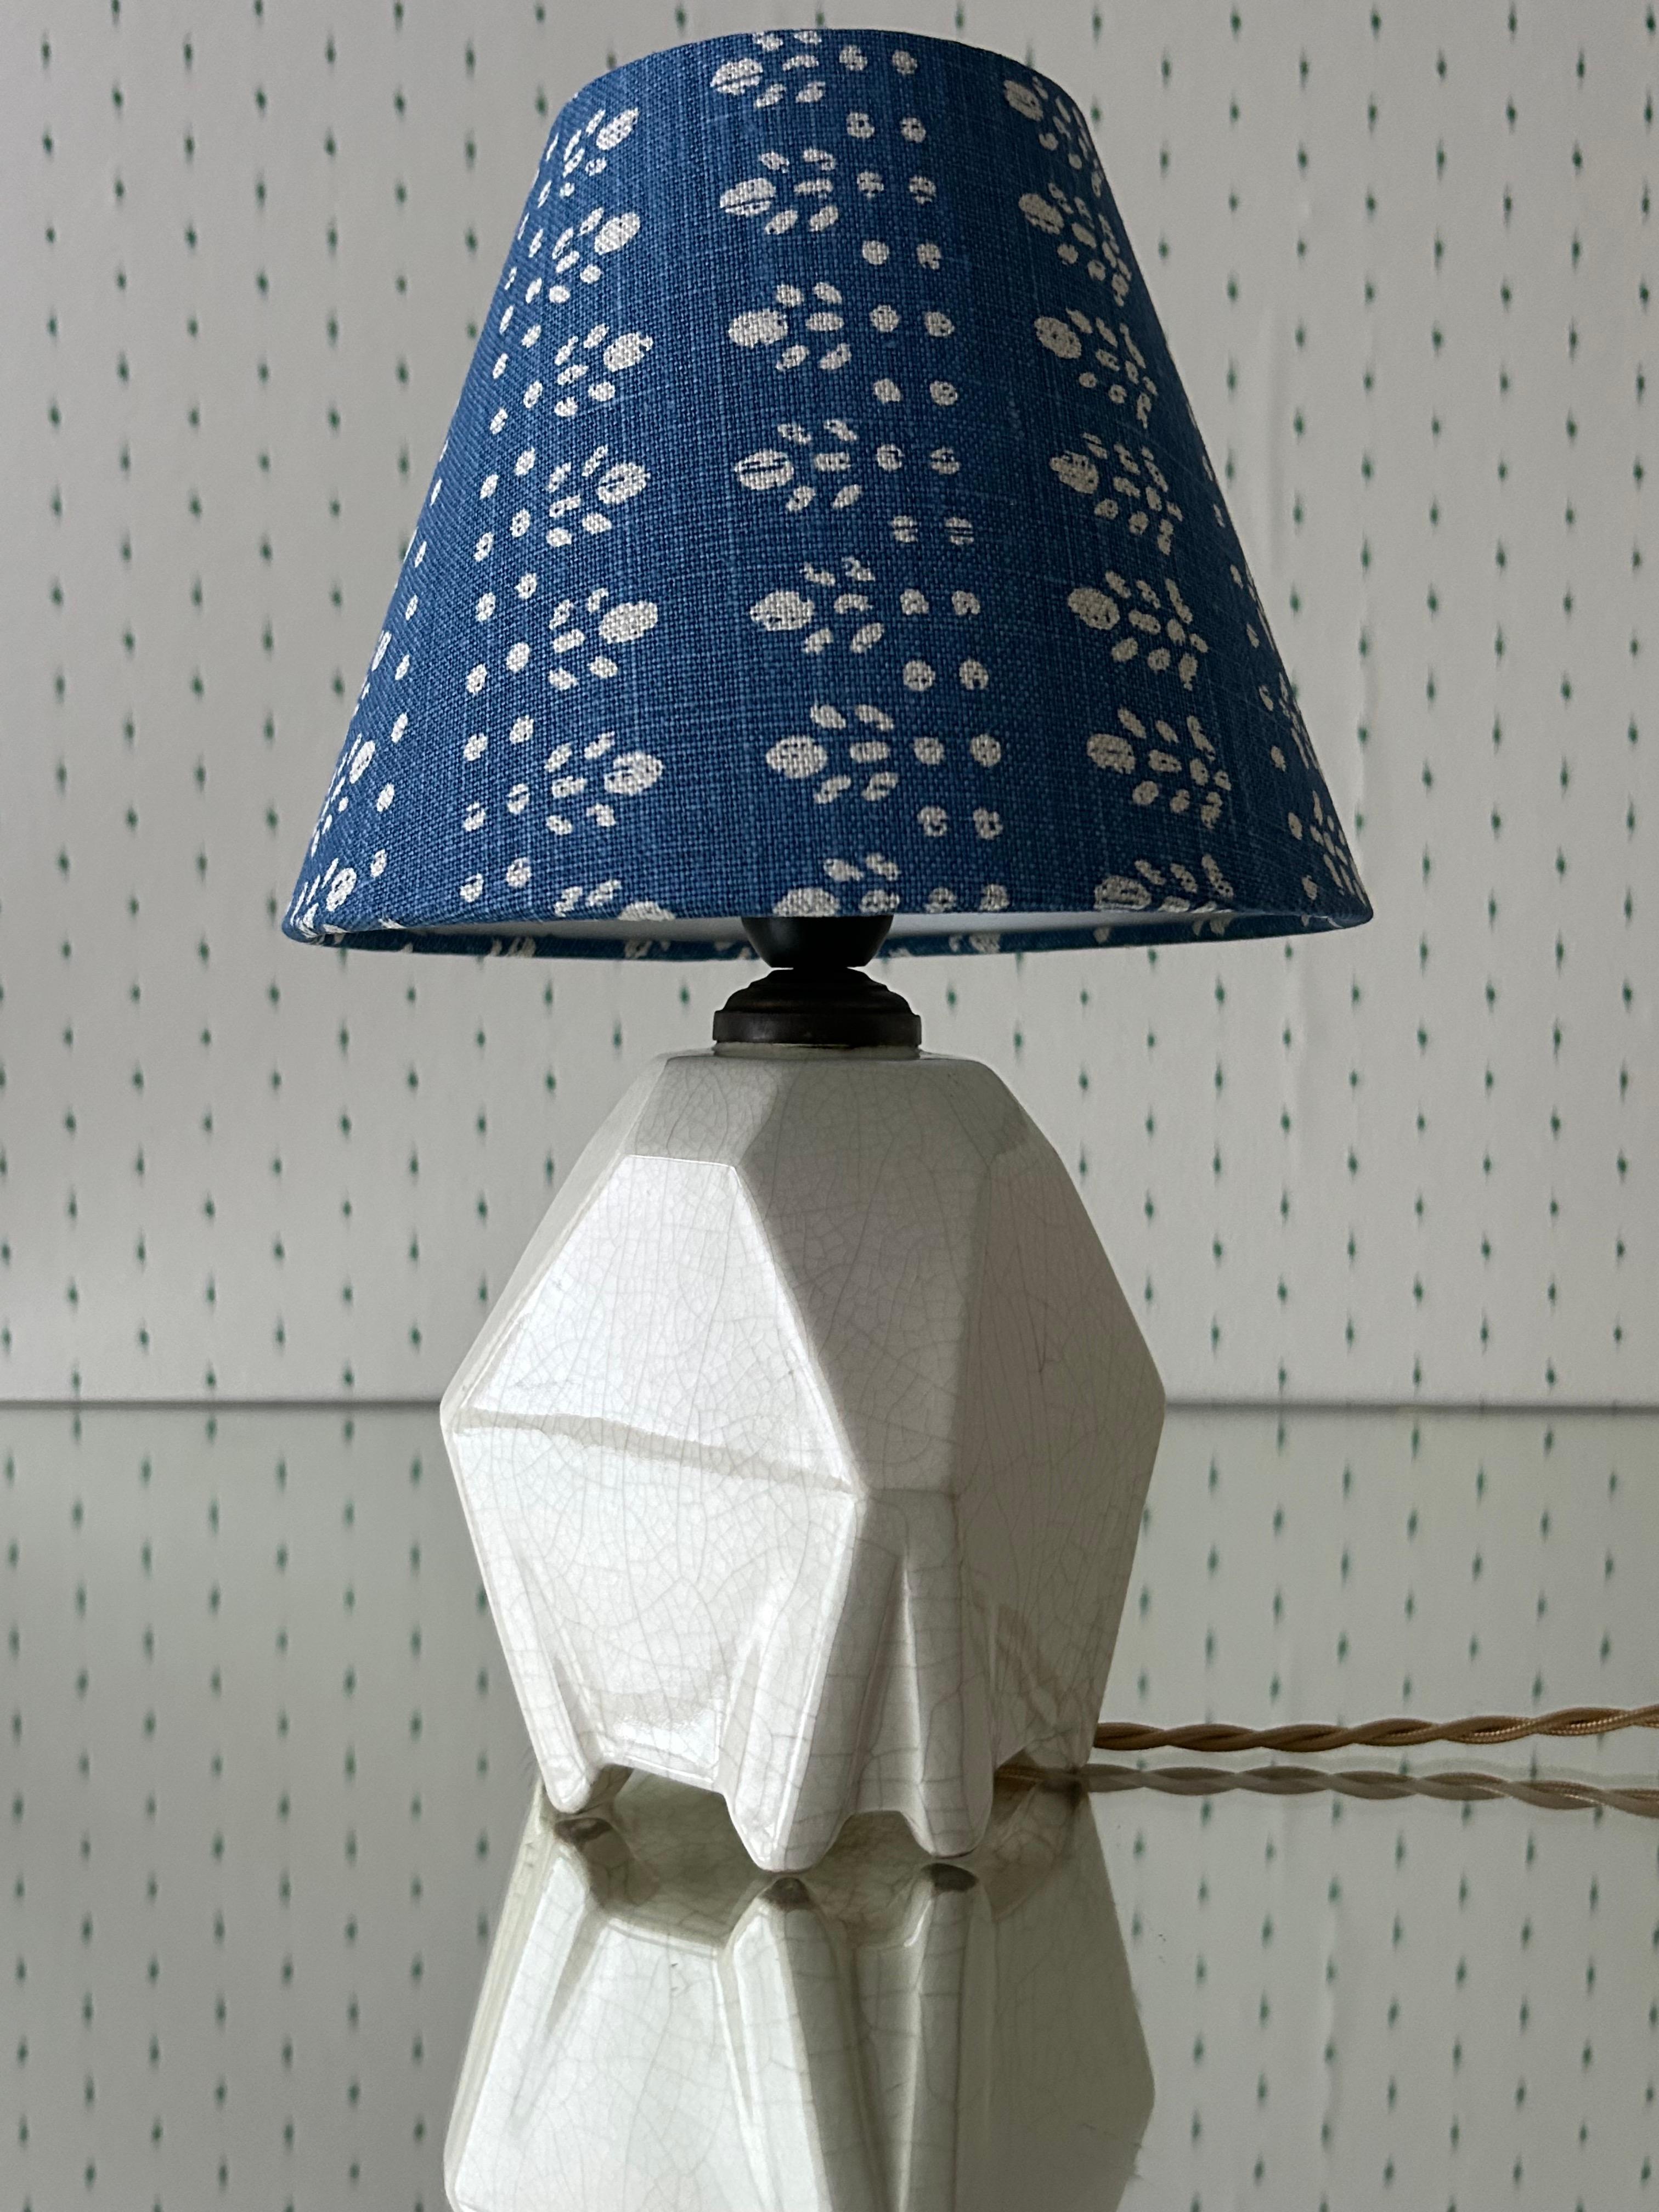 Glazed Vintage Ceramic Table Lamp in White with Customized Blue Shade, France, 1920s For Sale